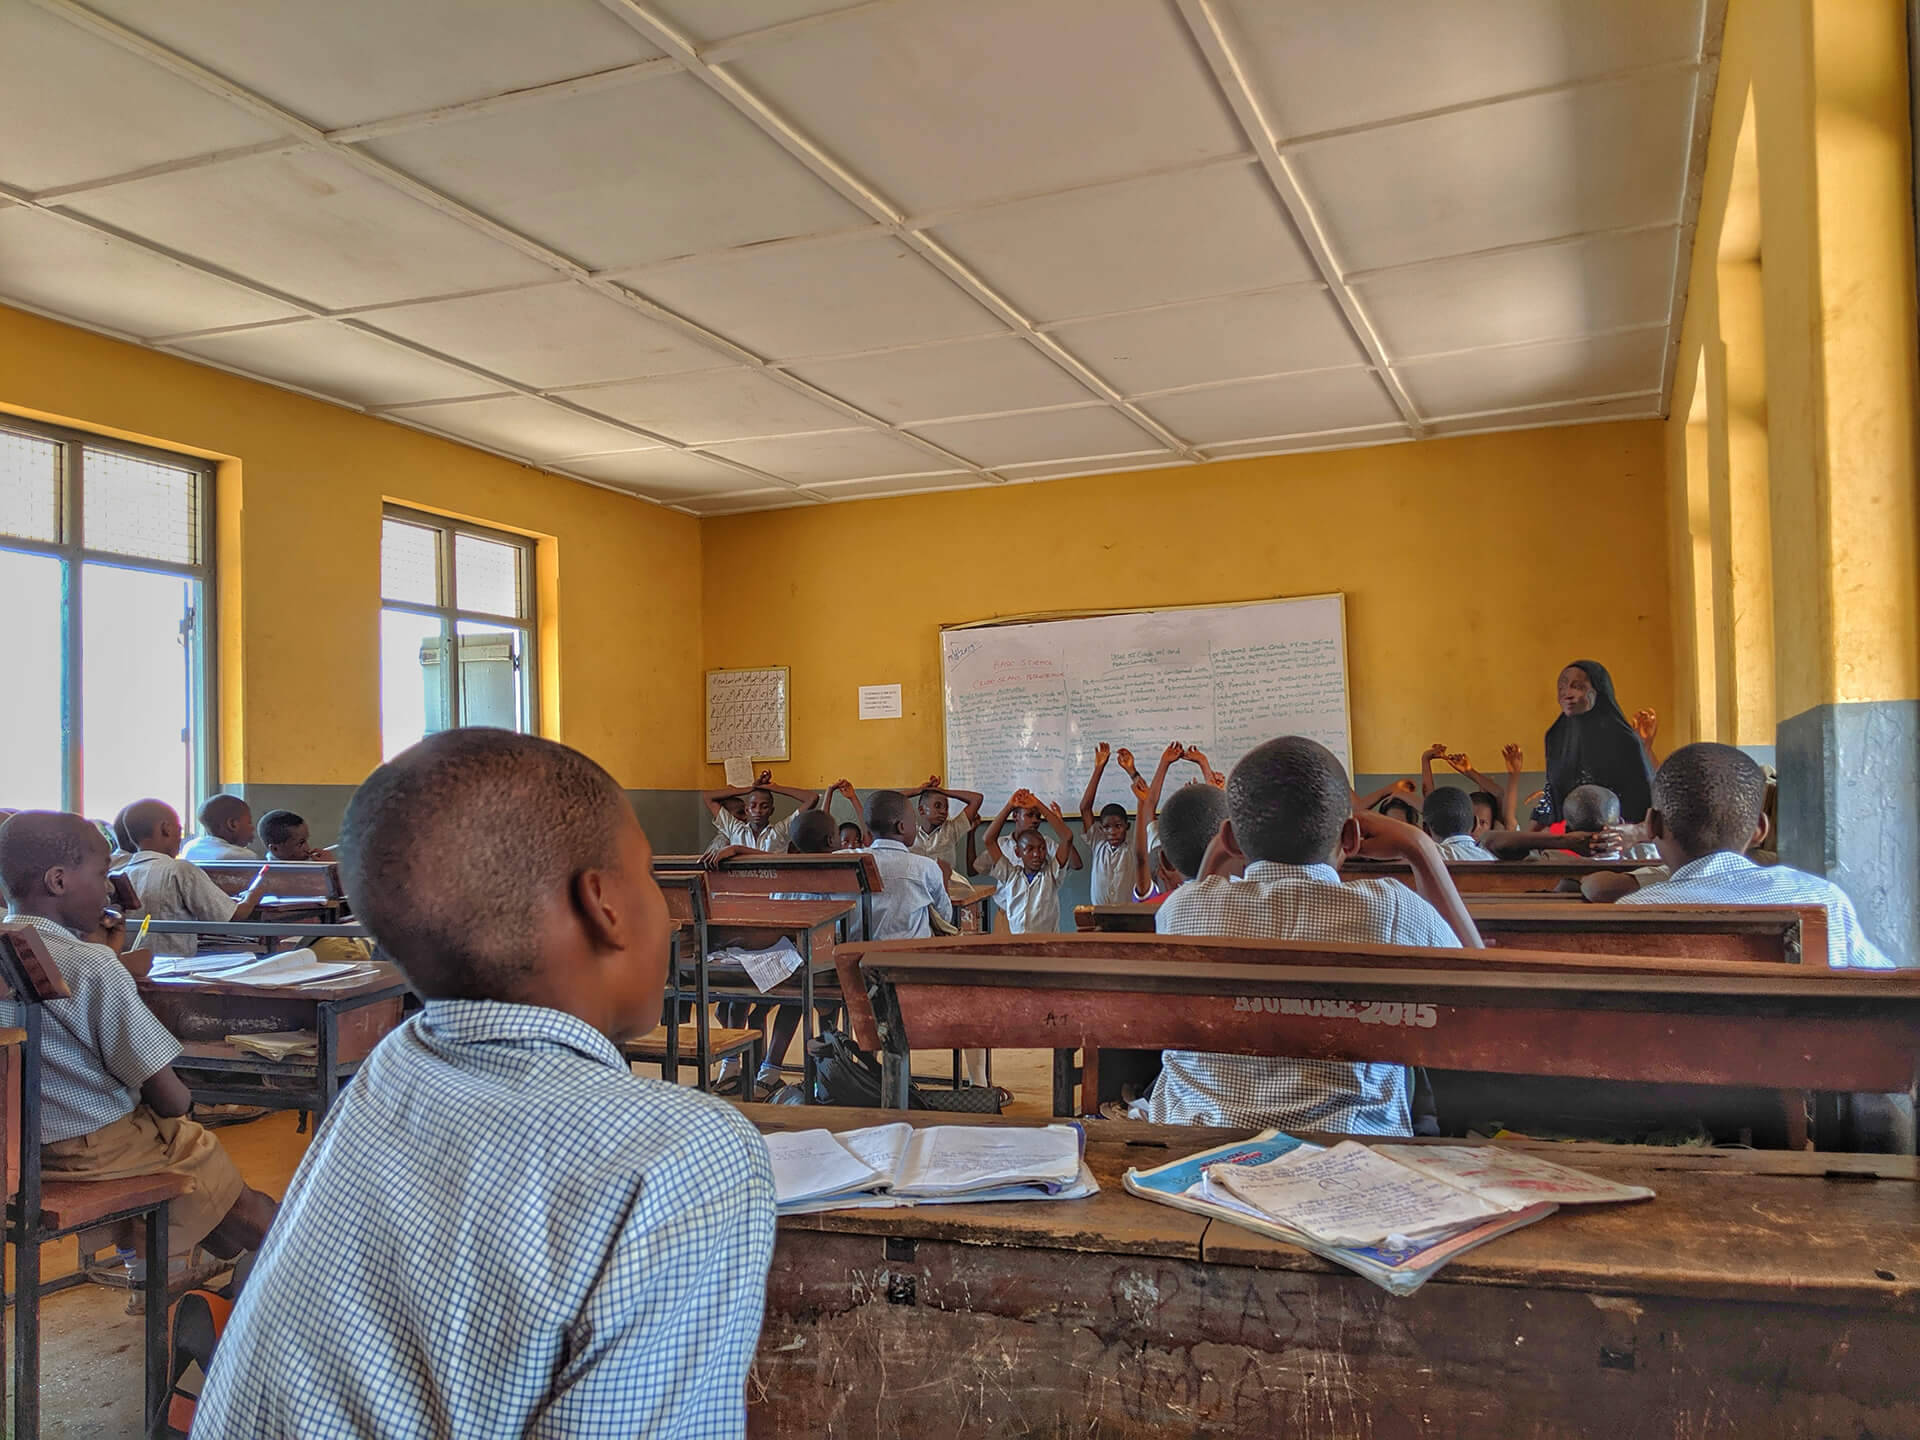 A classroom with students learning